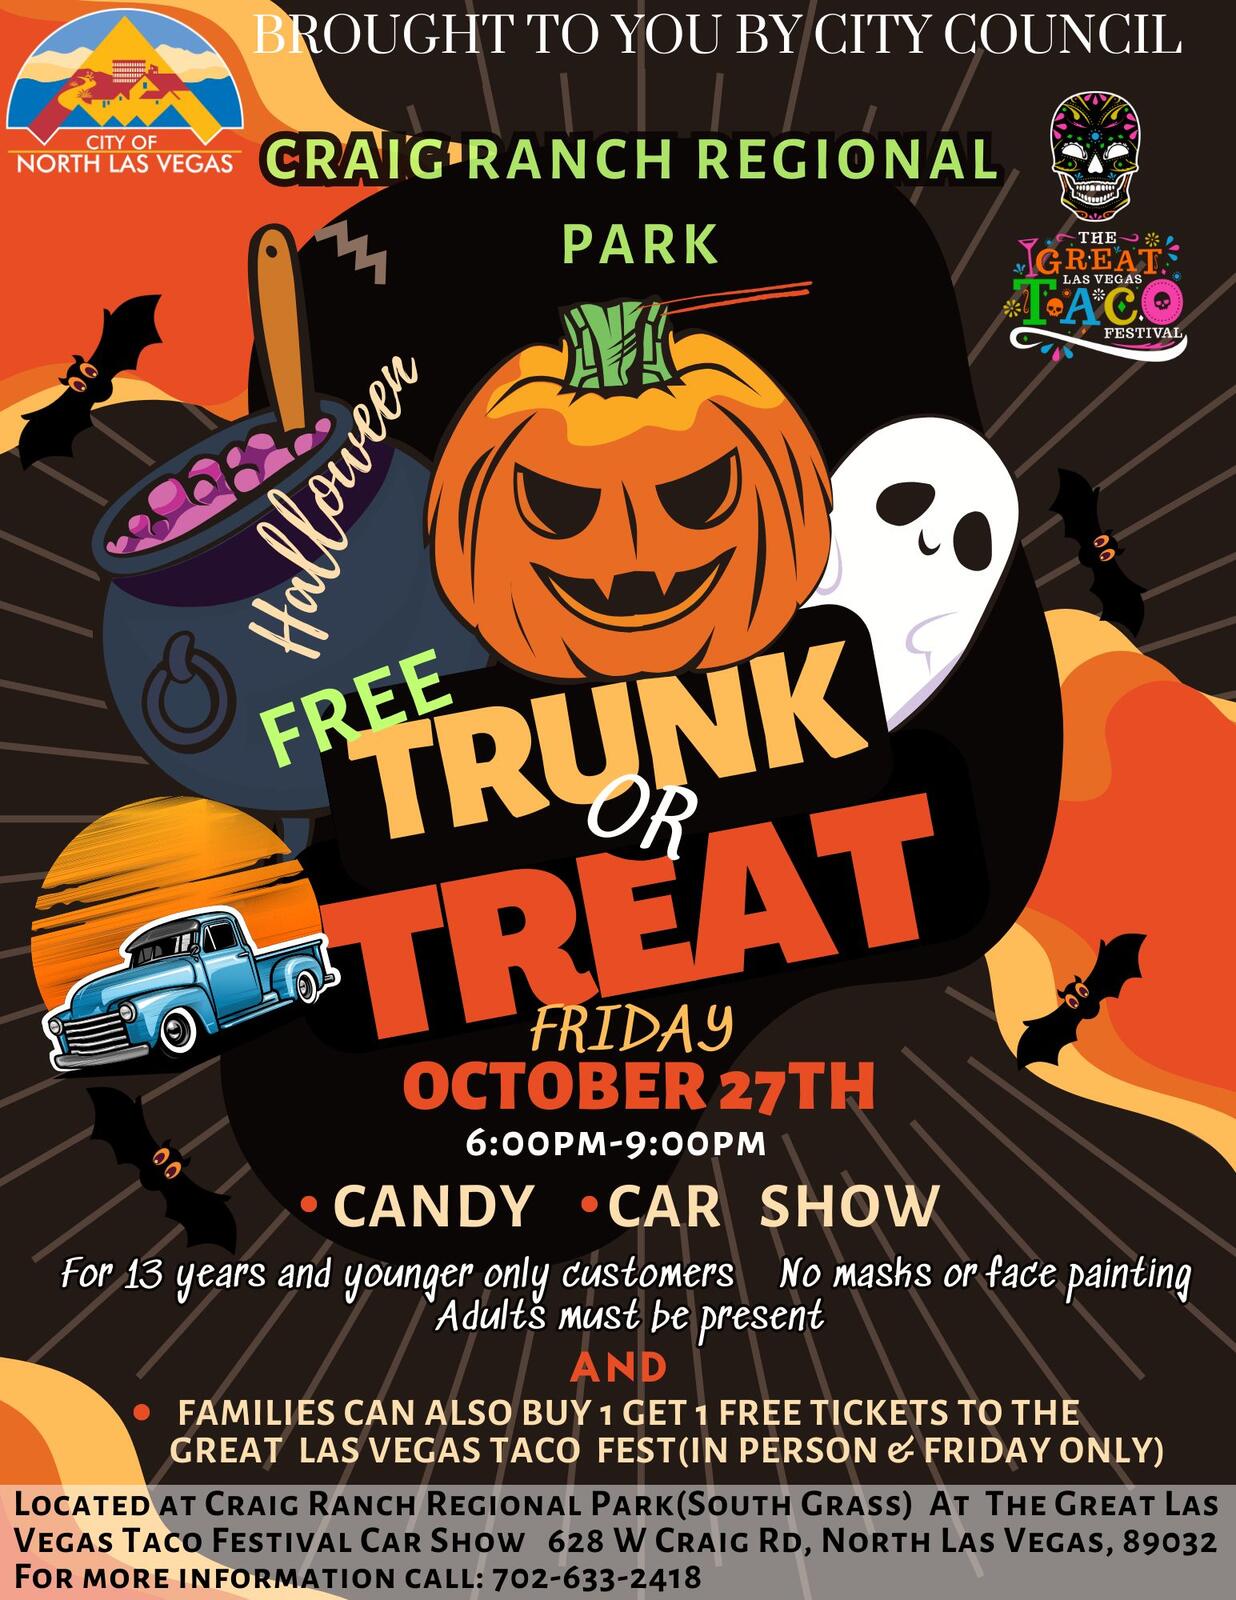 come-join-us-for-the-largest-trunk-or-treat-event-in-north-las-vegas-at